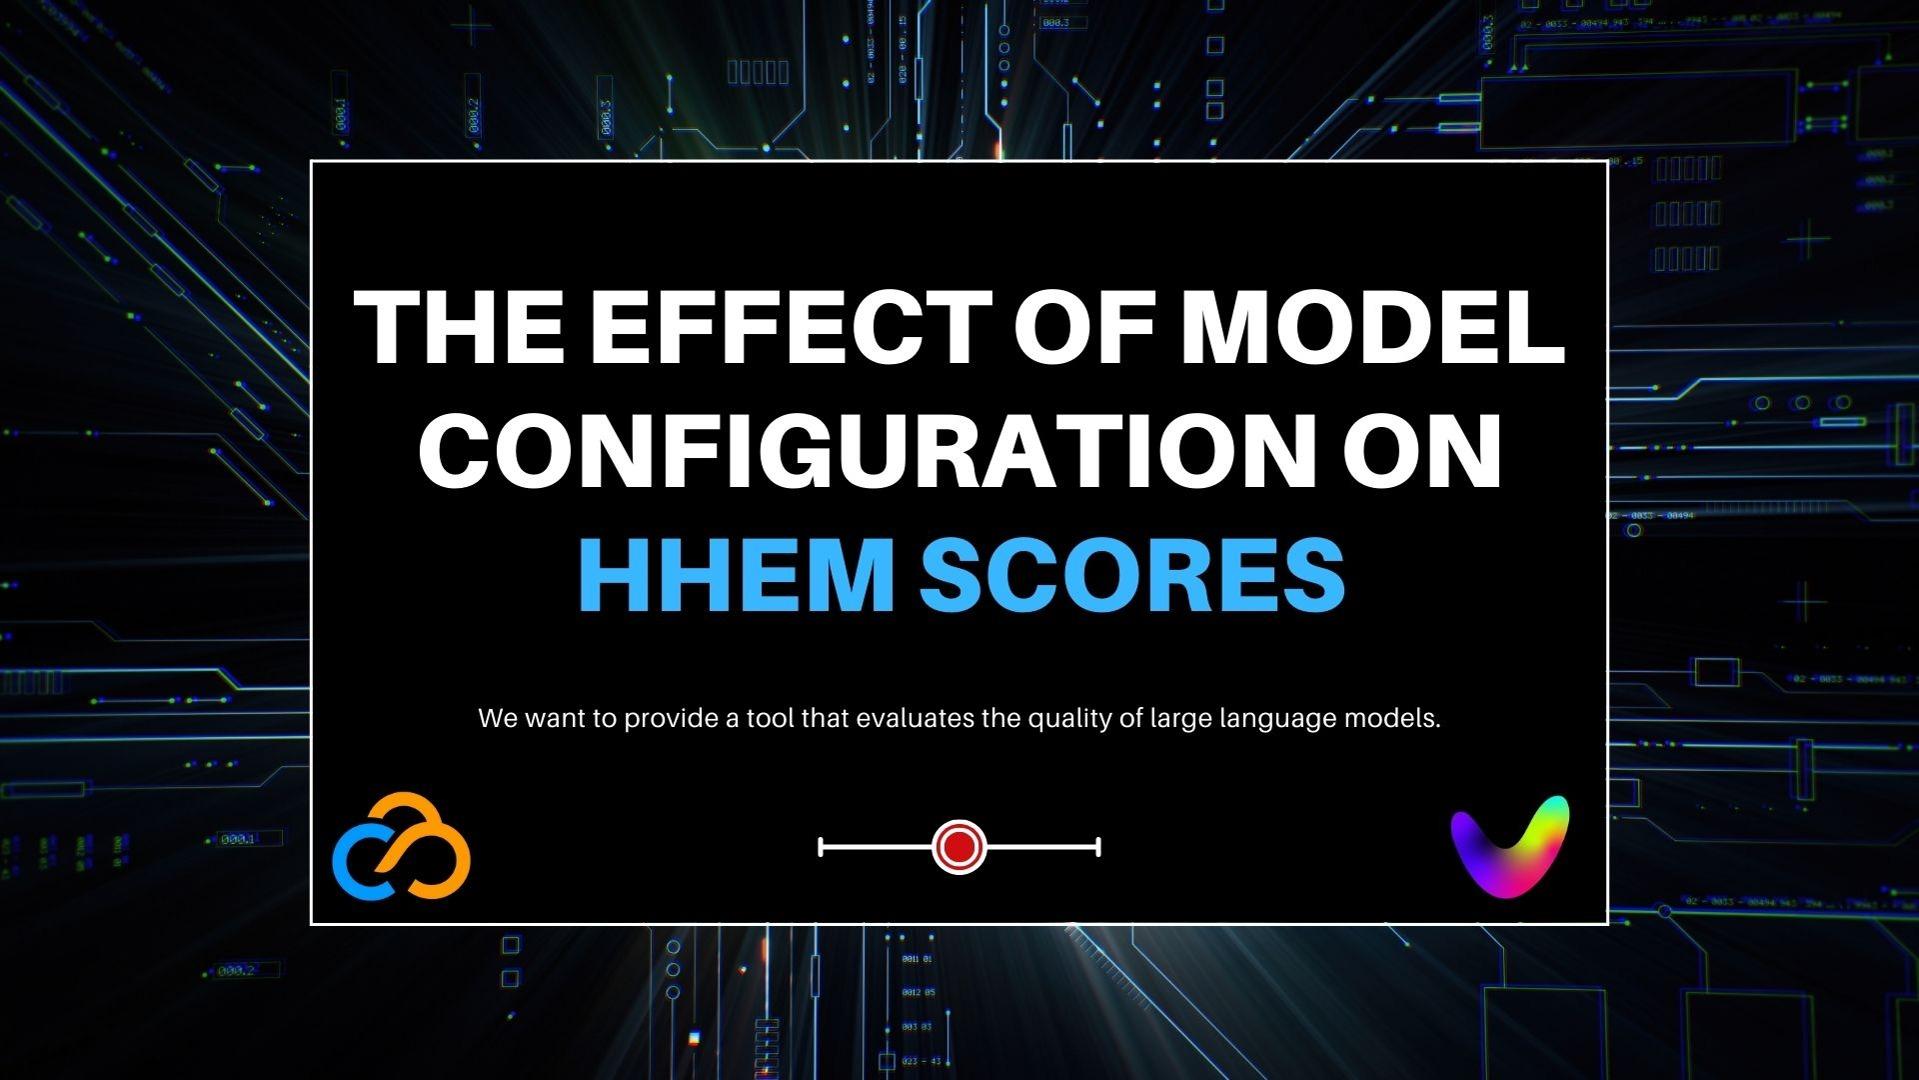 The Effect of Model Configuration on HHEM Scores